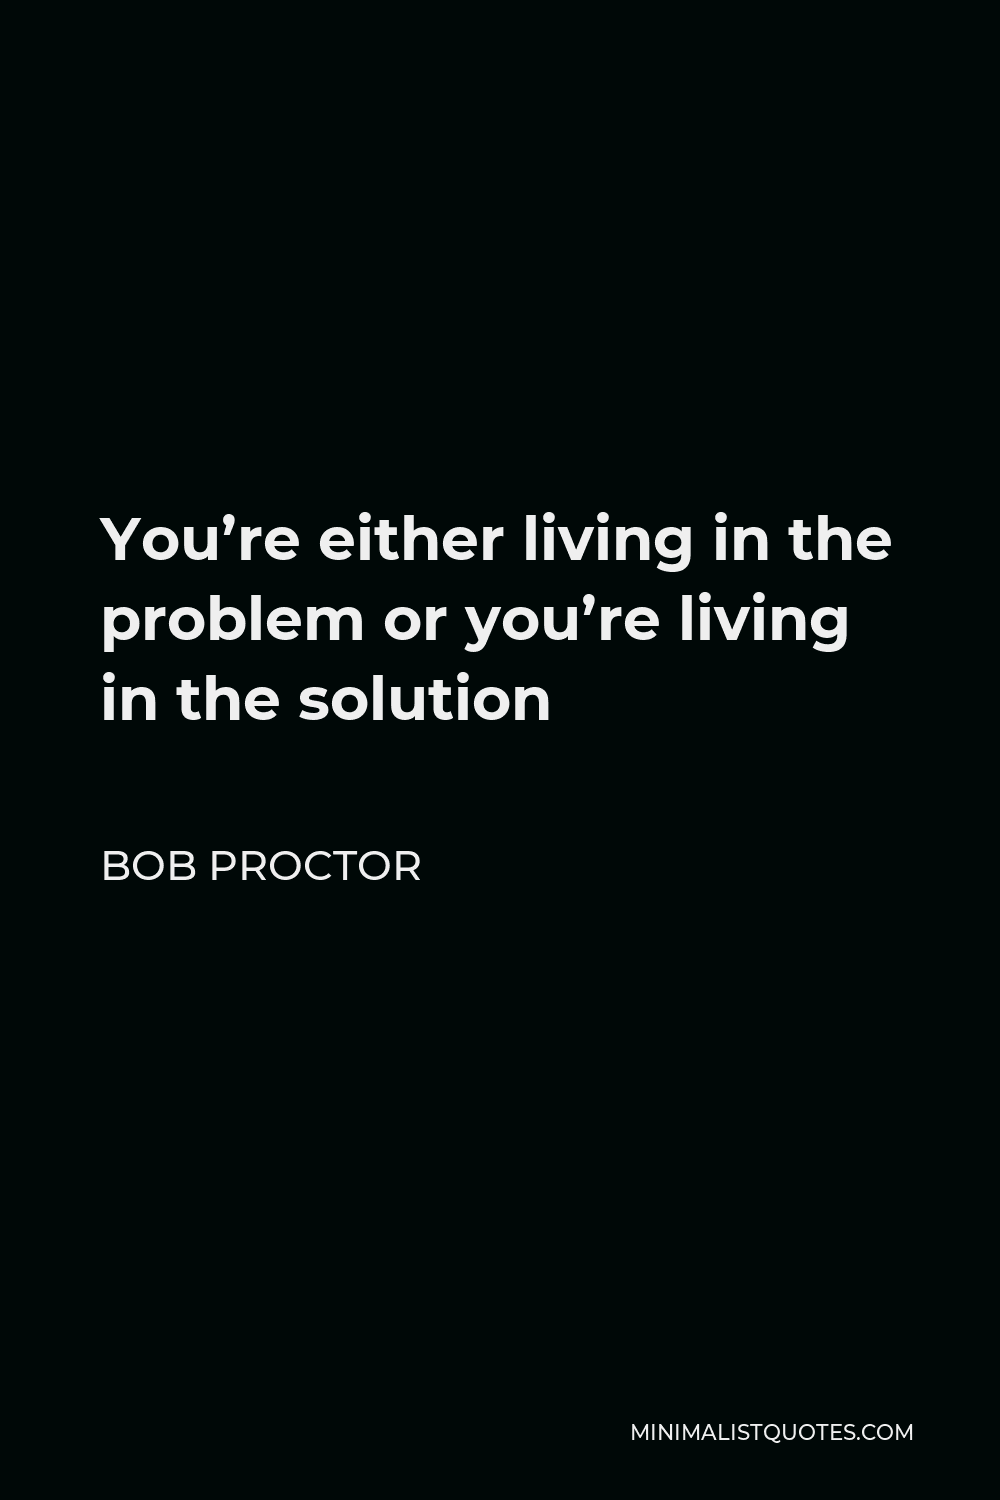 Bob Proctor Quote - You’re either living in the problem or you’re living in the solution